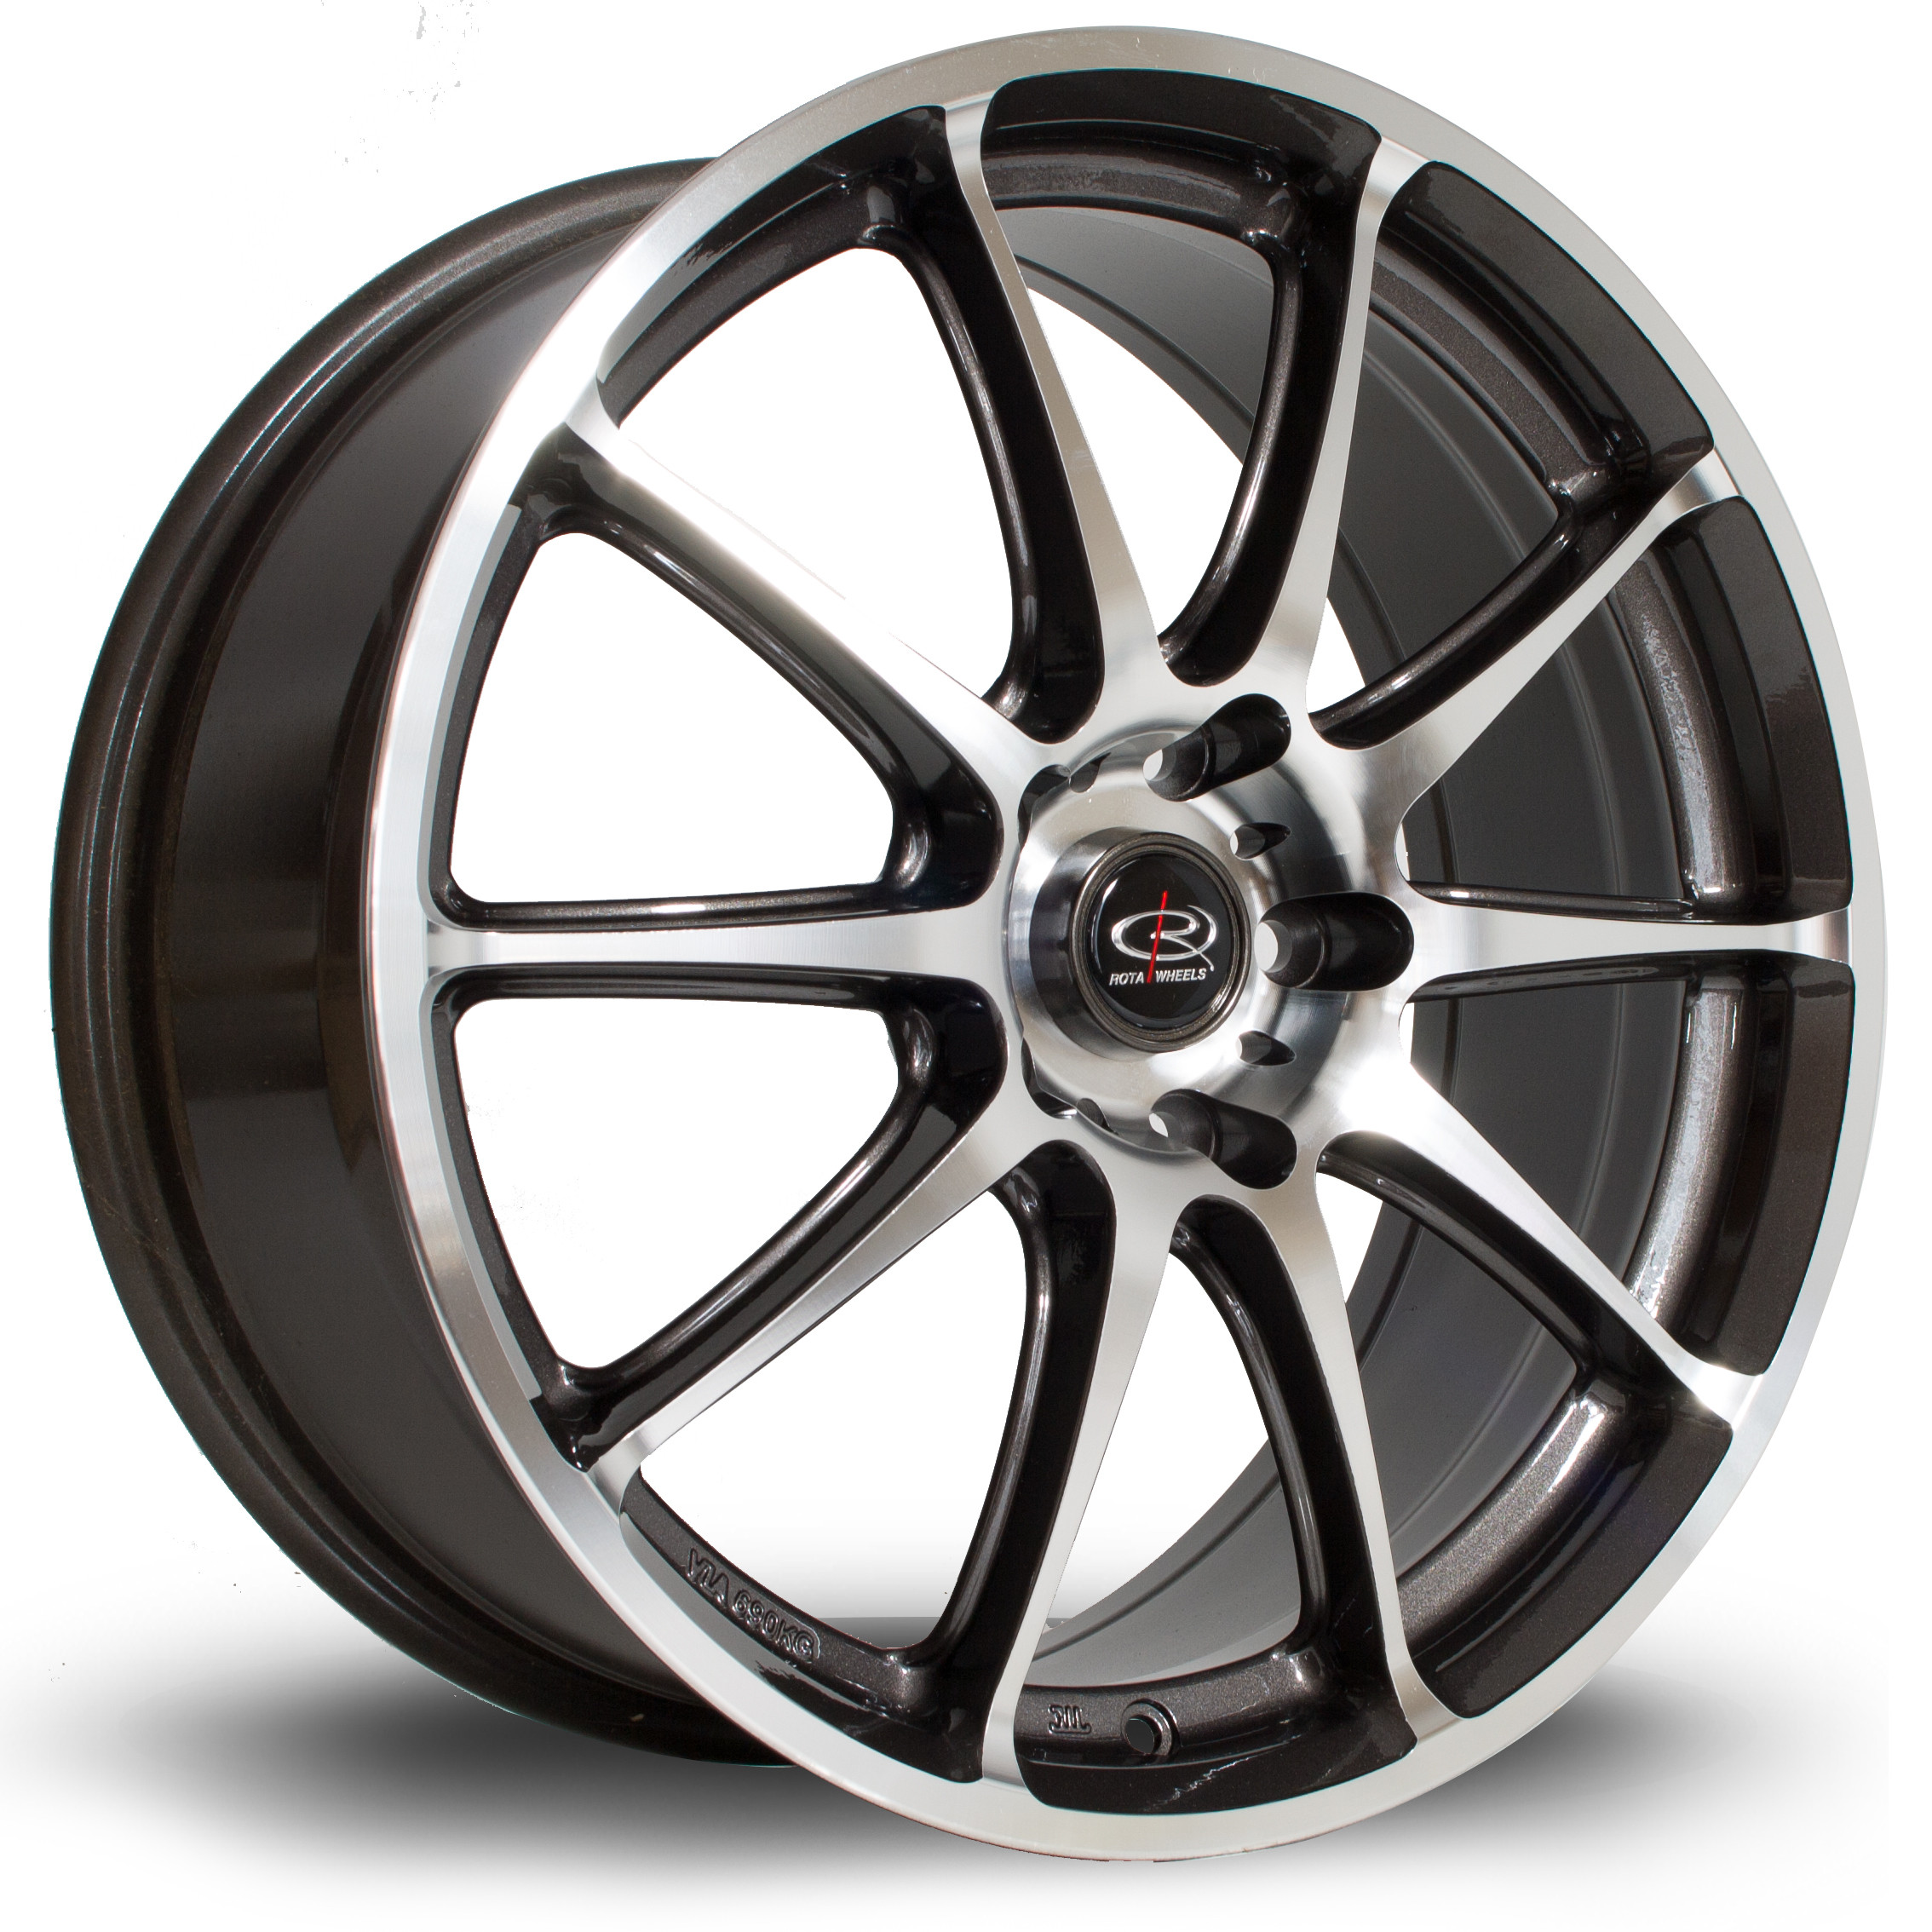 Gra 18x7.5 5x100 ET48 Gunmetal with Polished Face